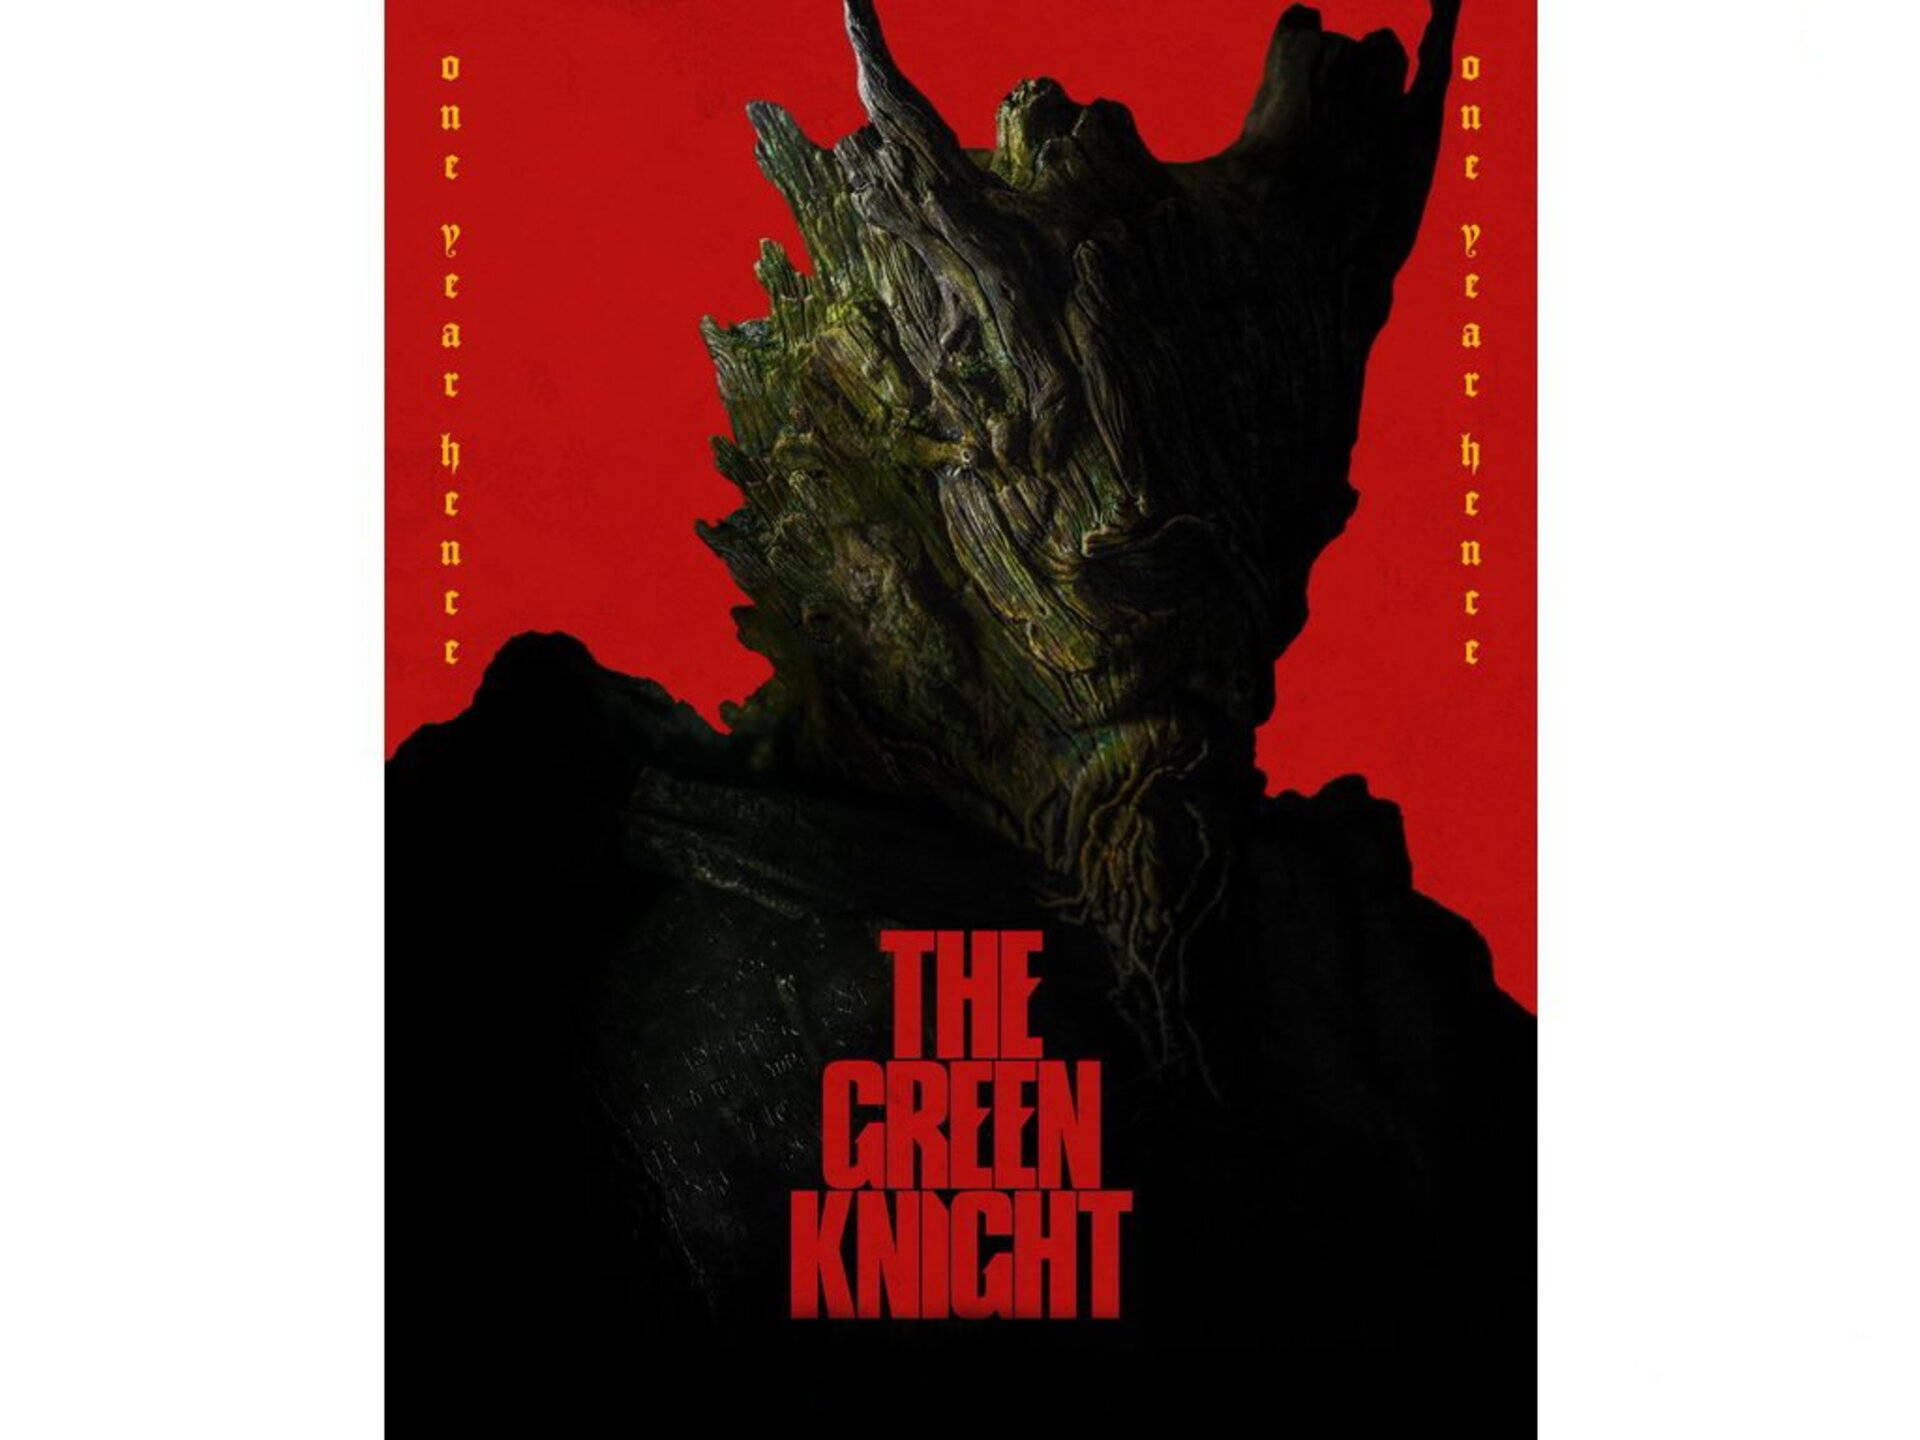 The Green Knight Poster Art Background